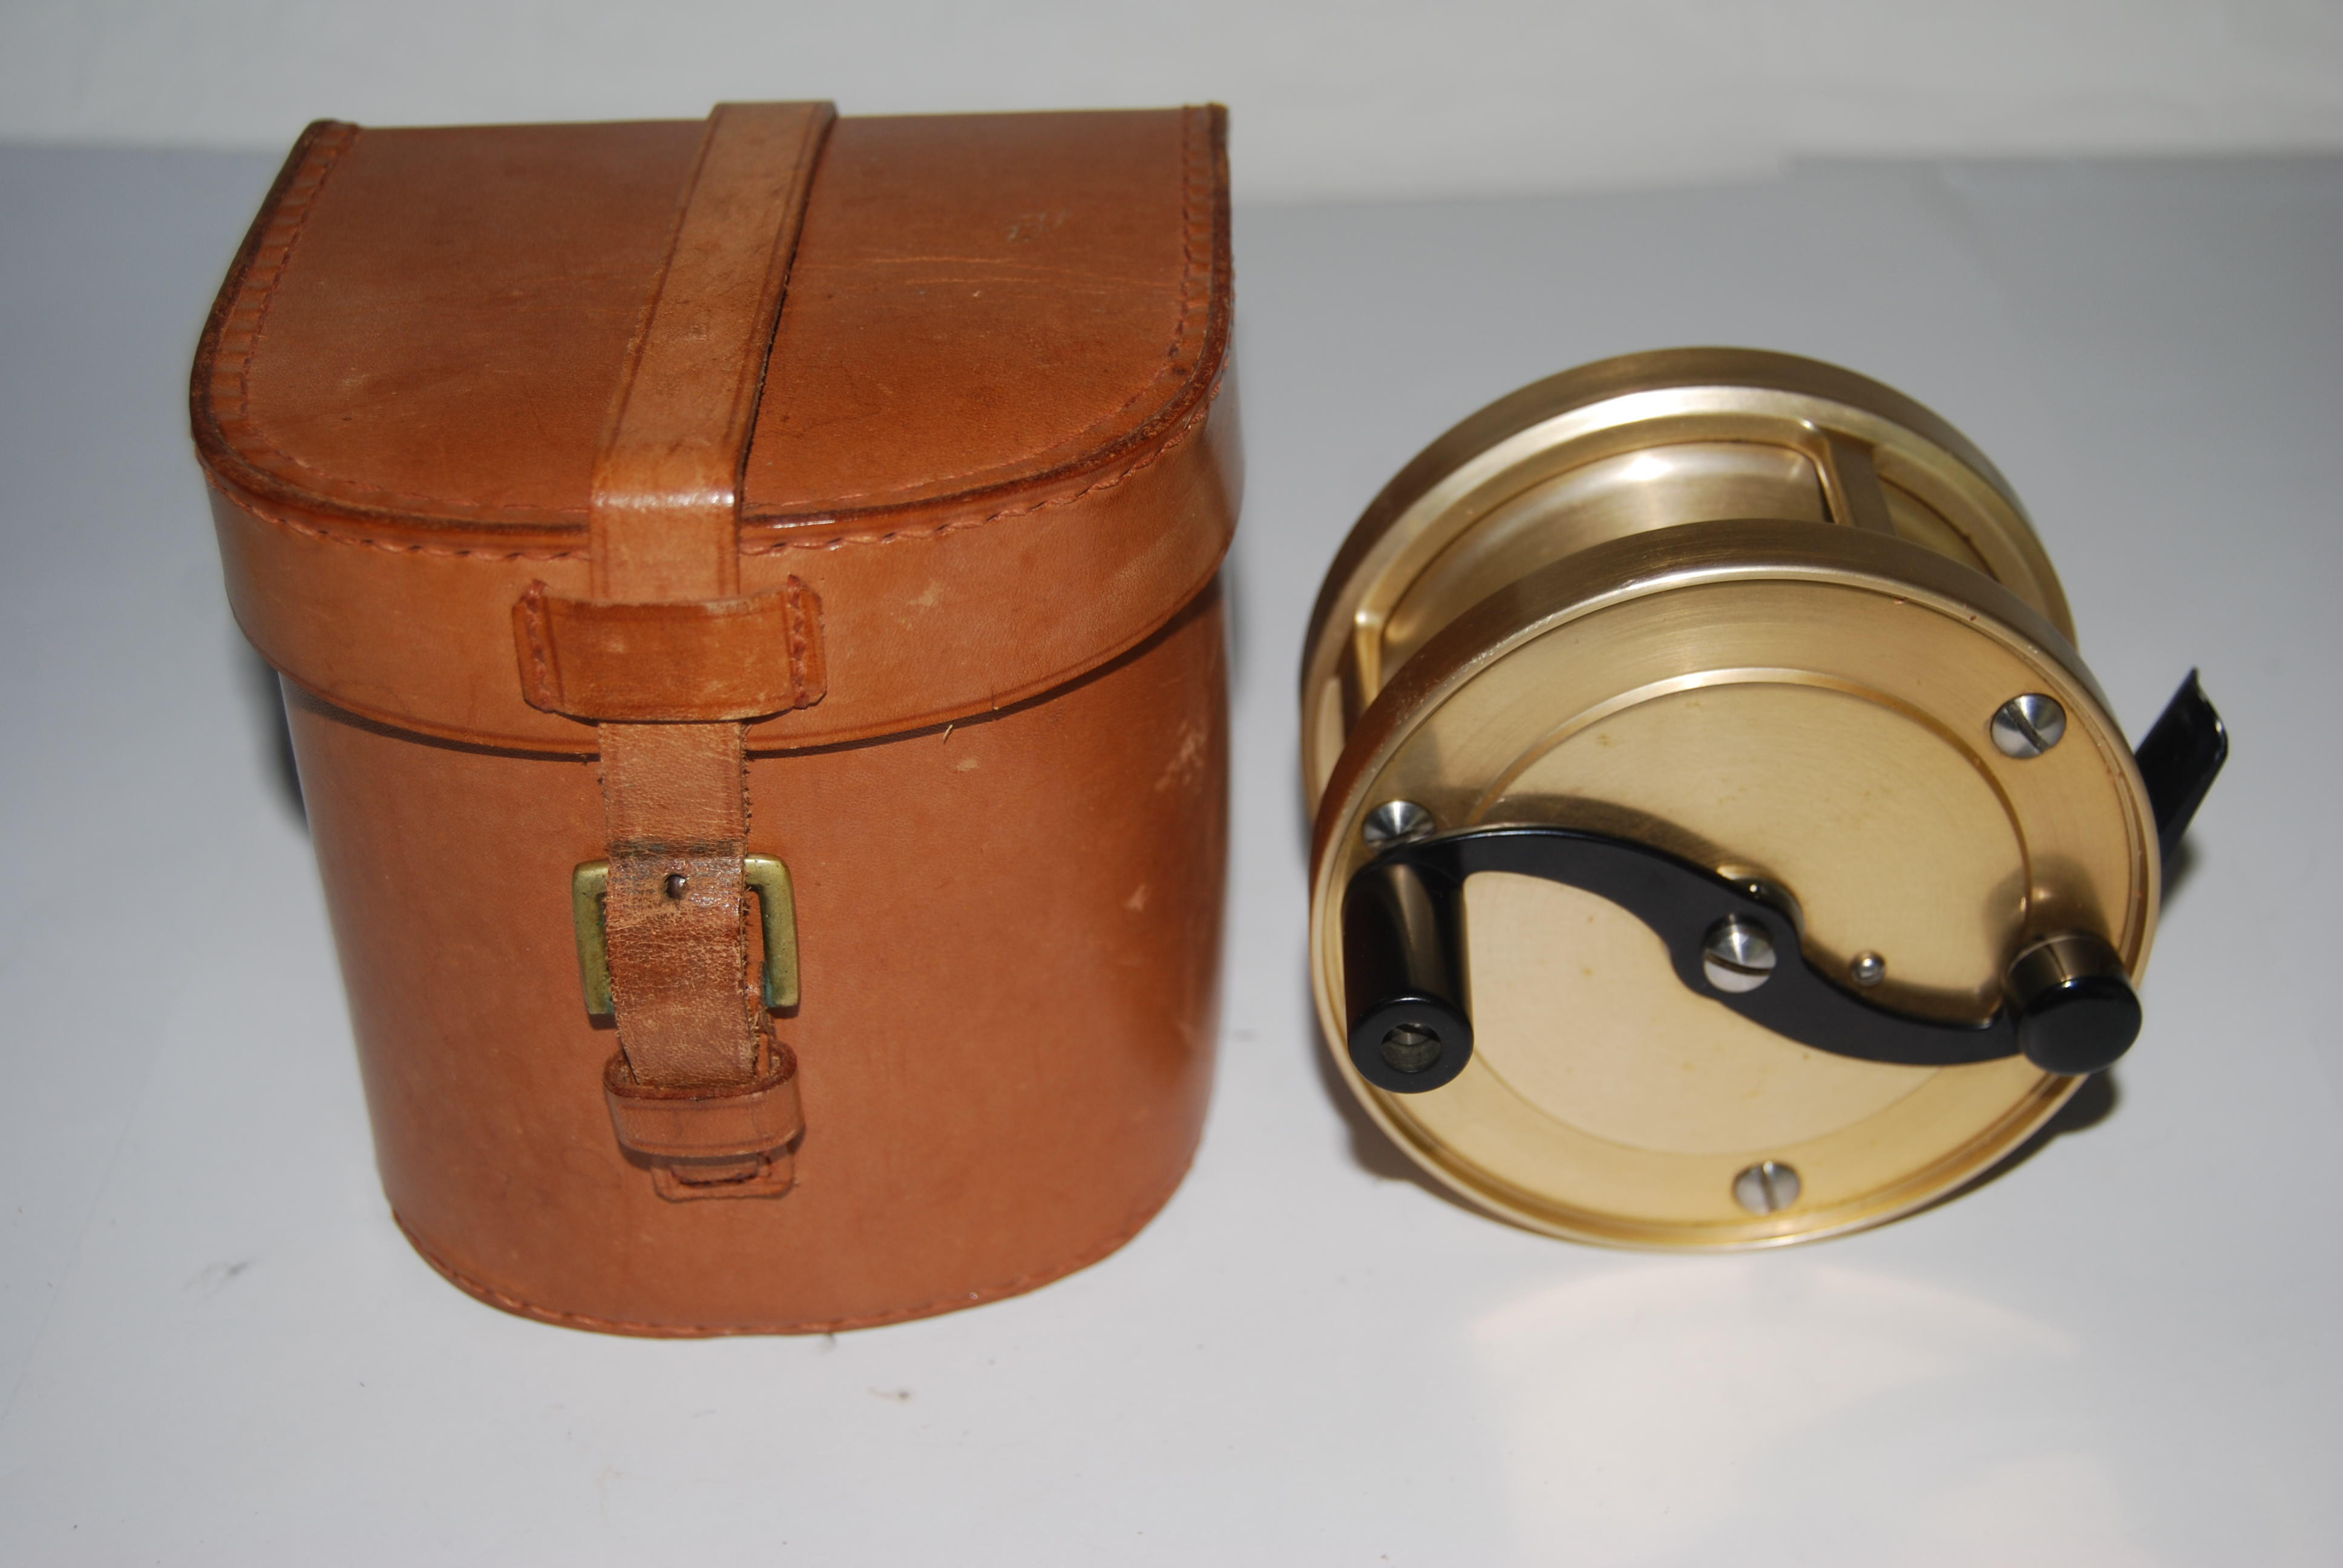 Vintage leather reel fishing case for a 4 Salmon reel